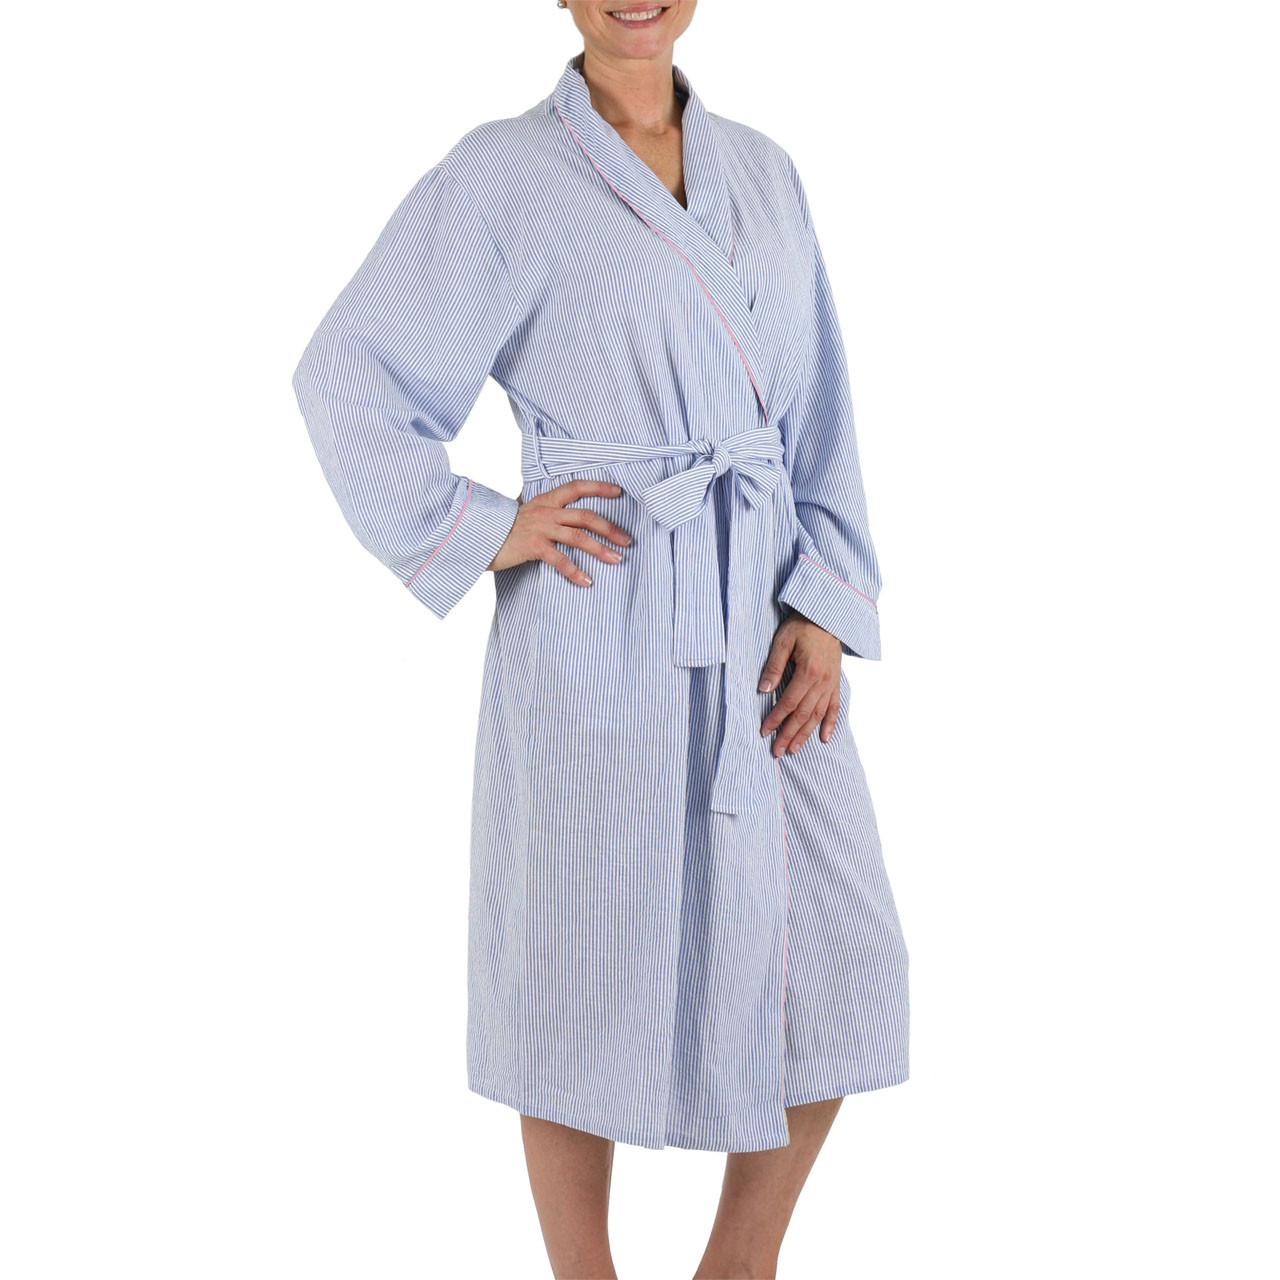 CREEVA Luxury 100% Cotton Shawl Collar Bathrobe, Dressing Gown, Super Soft,  Absorbent-Perfect for Gym, Shower, Spa, Hotel Robe, Vacation (Cream and  Rust Dotted, Large) : Amazon.in: Fashion